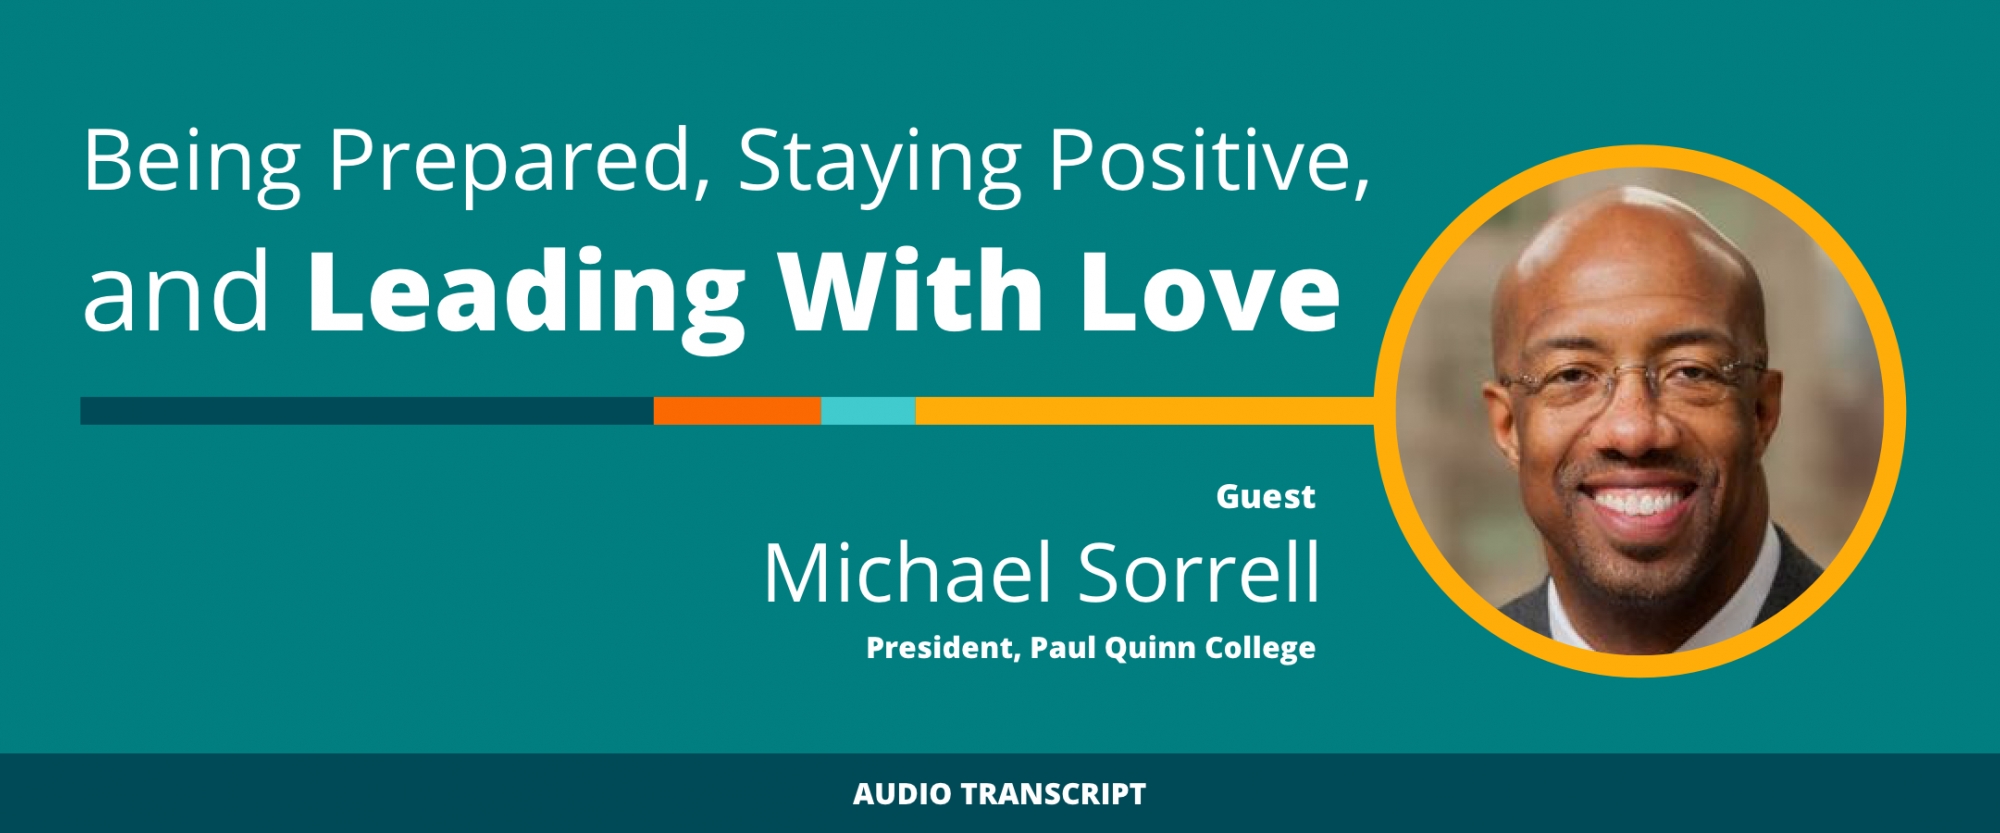 Weekly Wisdom Episode 2: Transcript of Conversation With Michael Sorrell, Paul Quinn College President